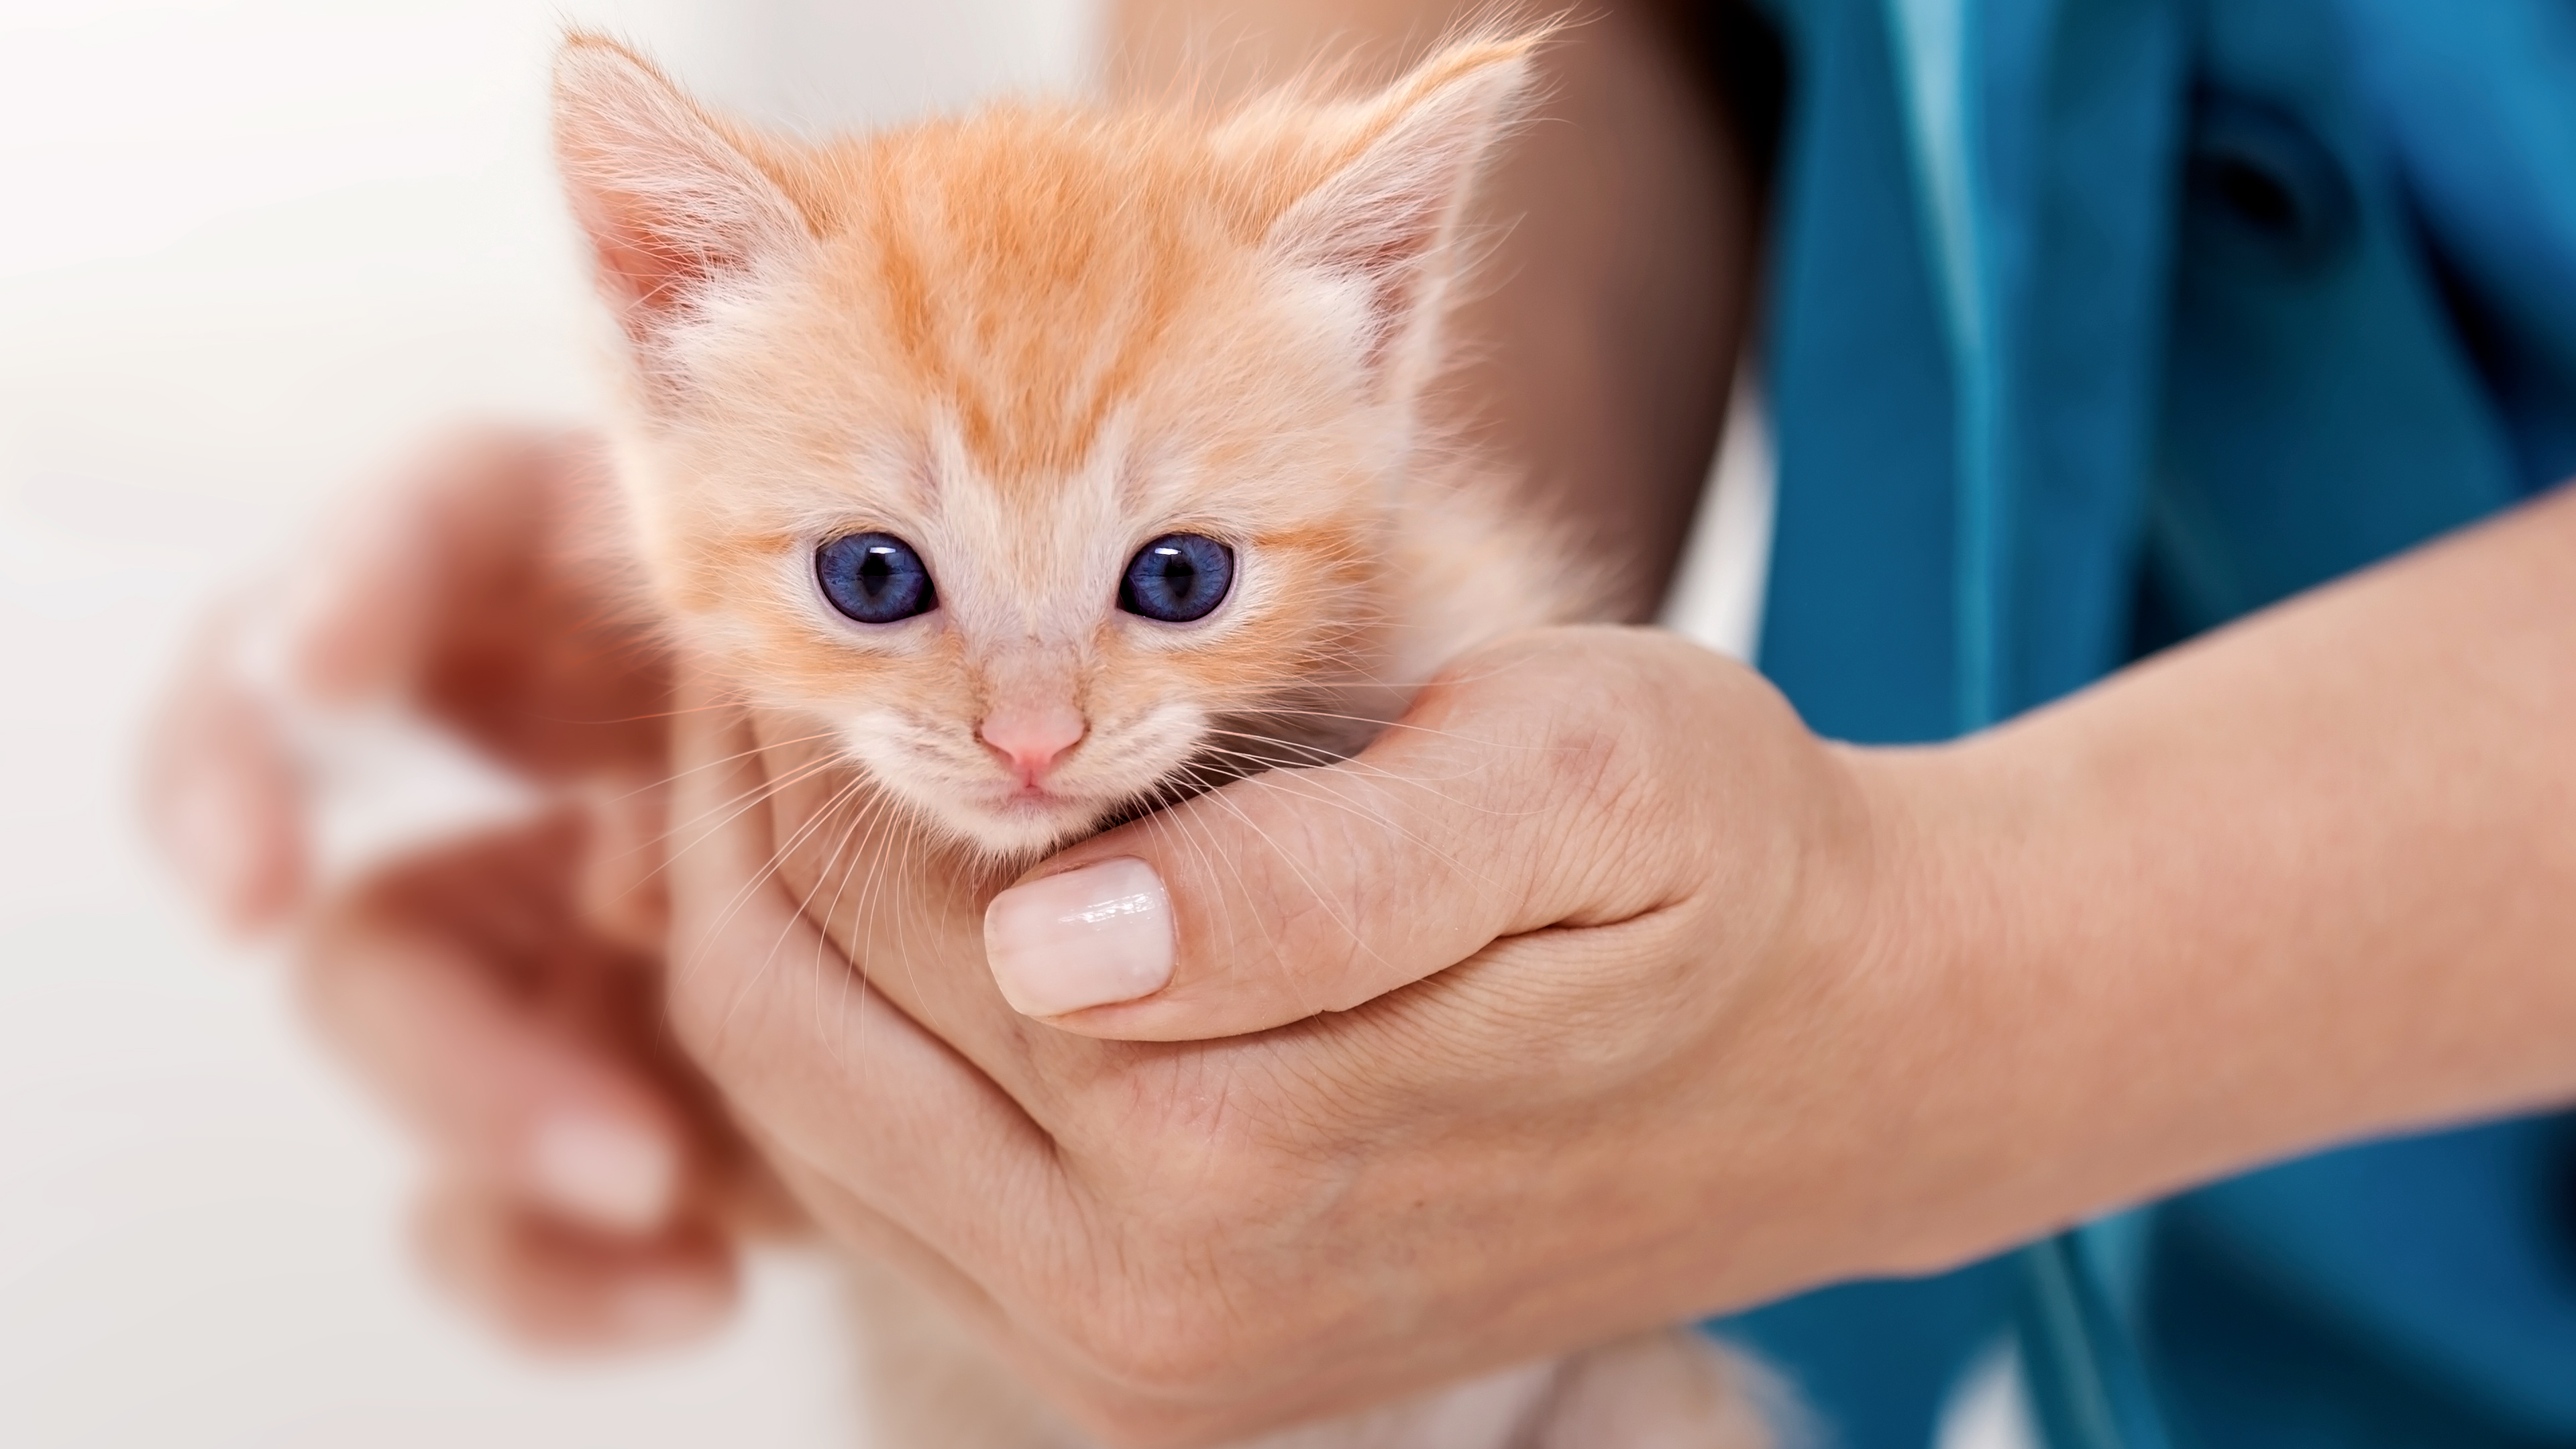 Kitten being held and examined by a vet